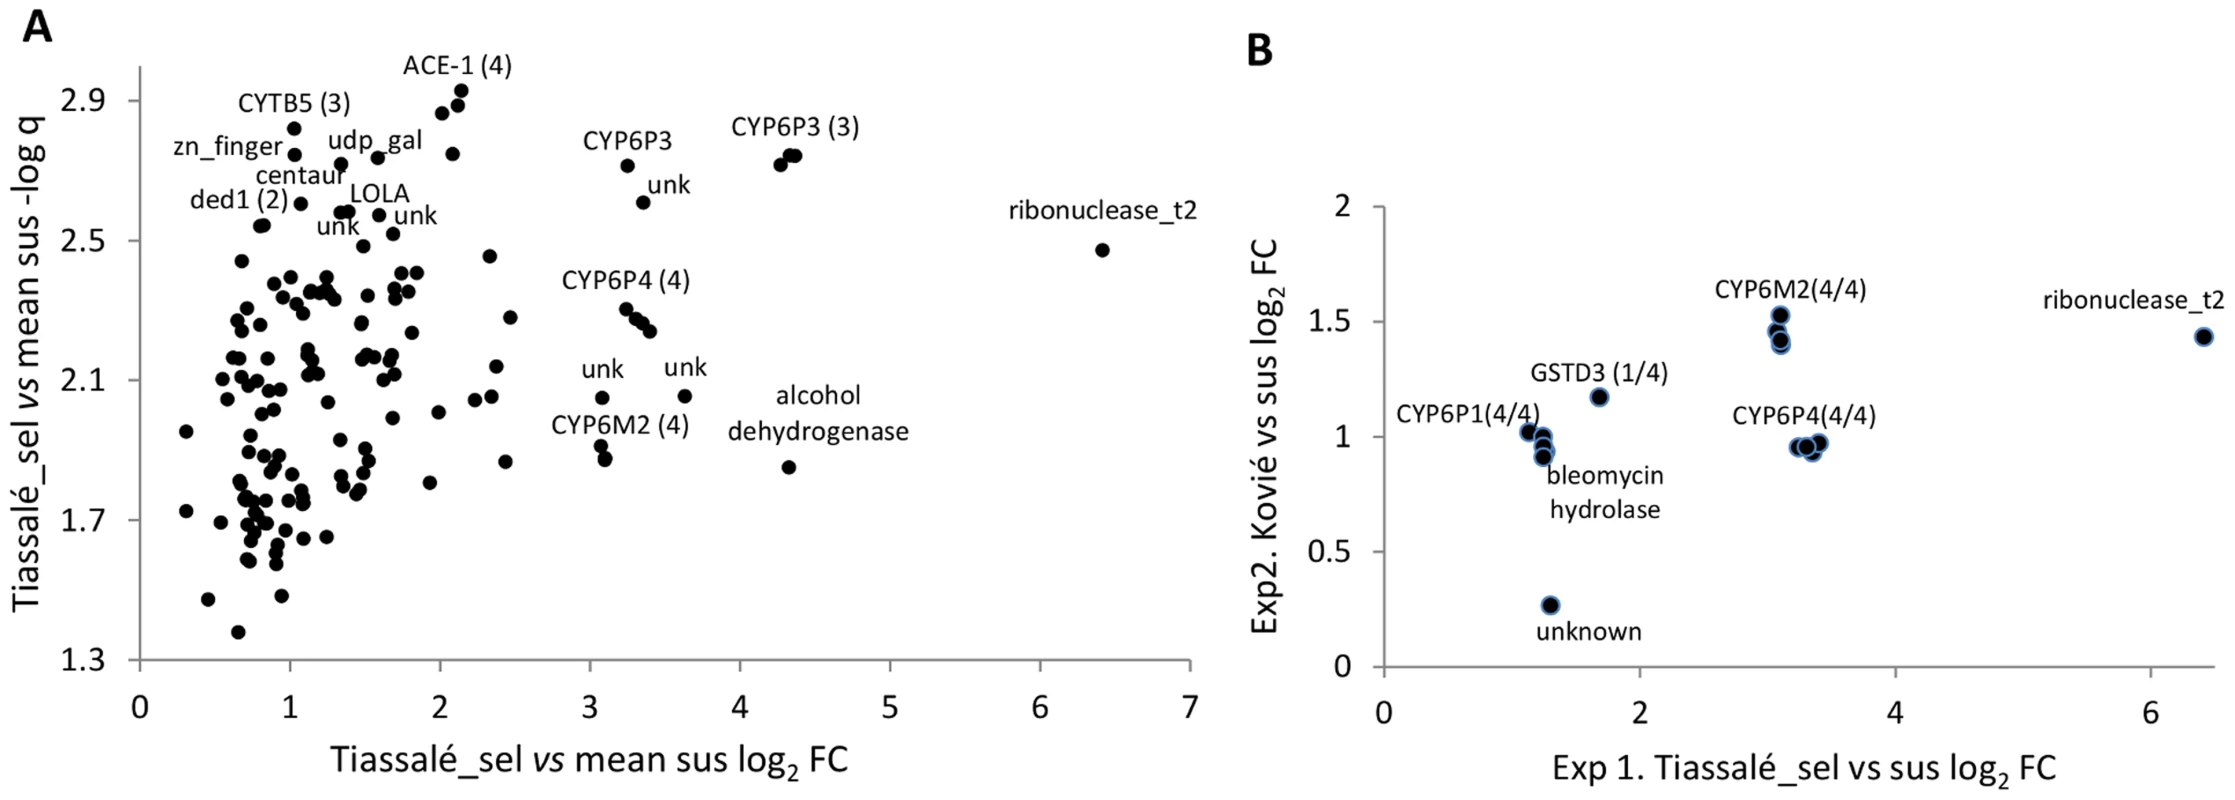 Genes significantly overexpressed (relative to susceptible samples) in (A) Tiassalé bendiocarb resistant samples in Exp1, and (B). both Tiassalé and Kovié samples.